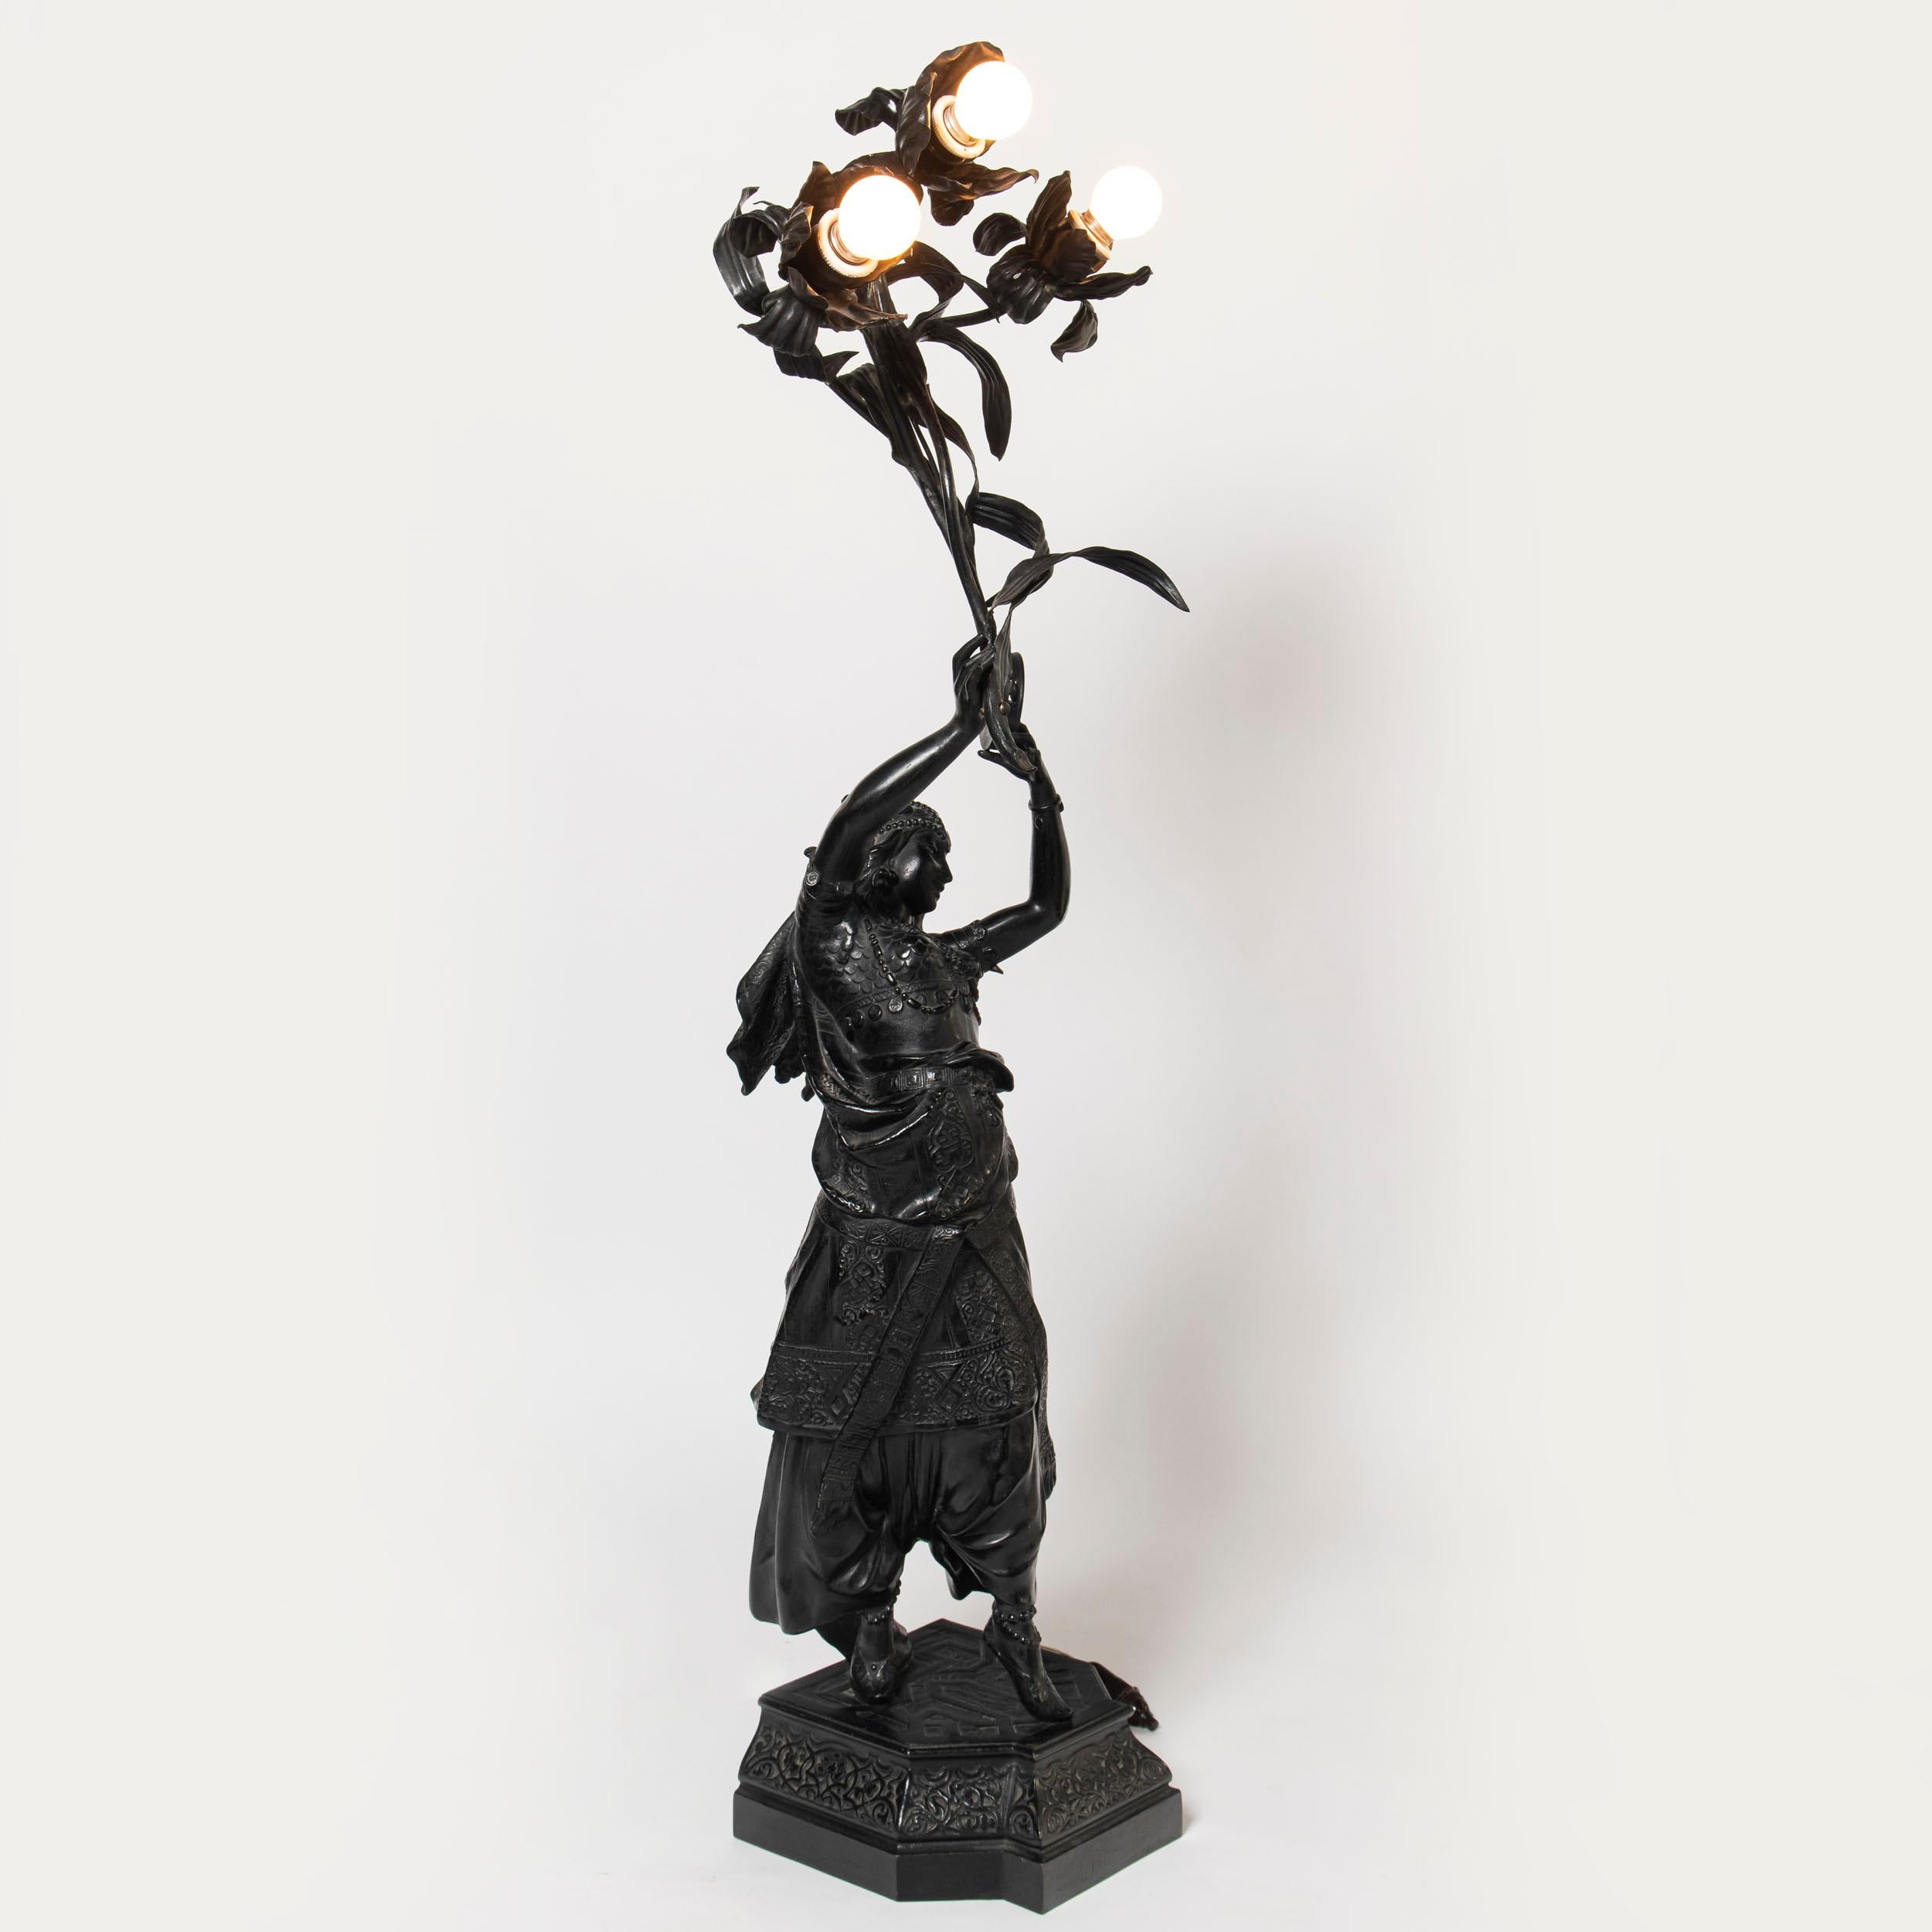 Bronze alloy table lamp sculpture signed Waagen. Germany, circa 1890.